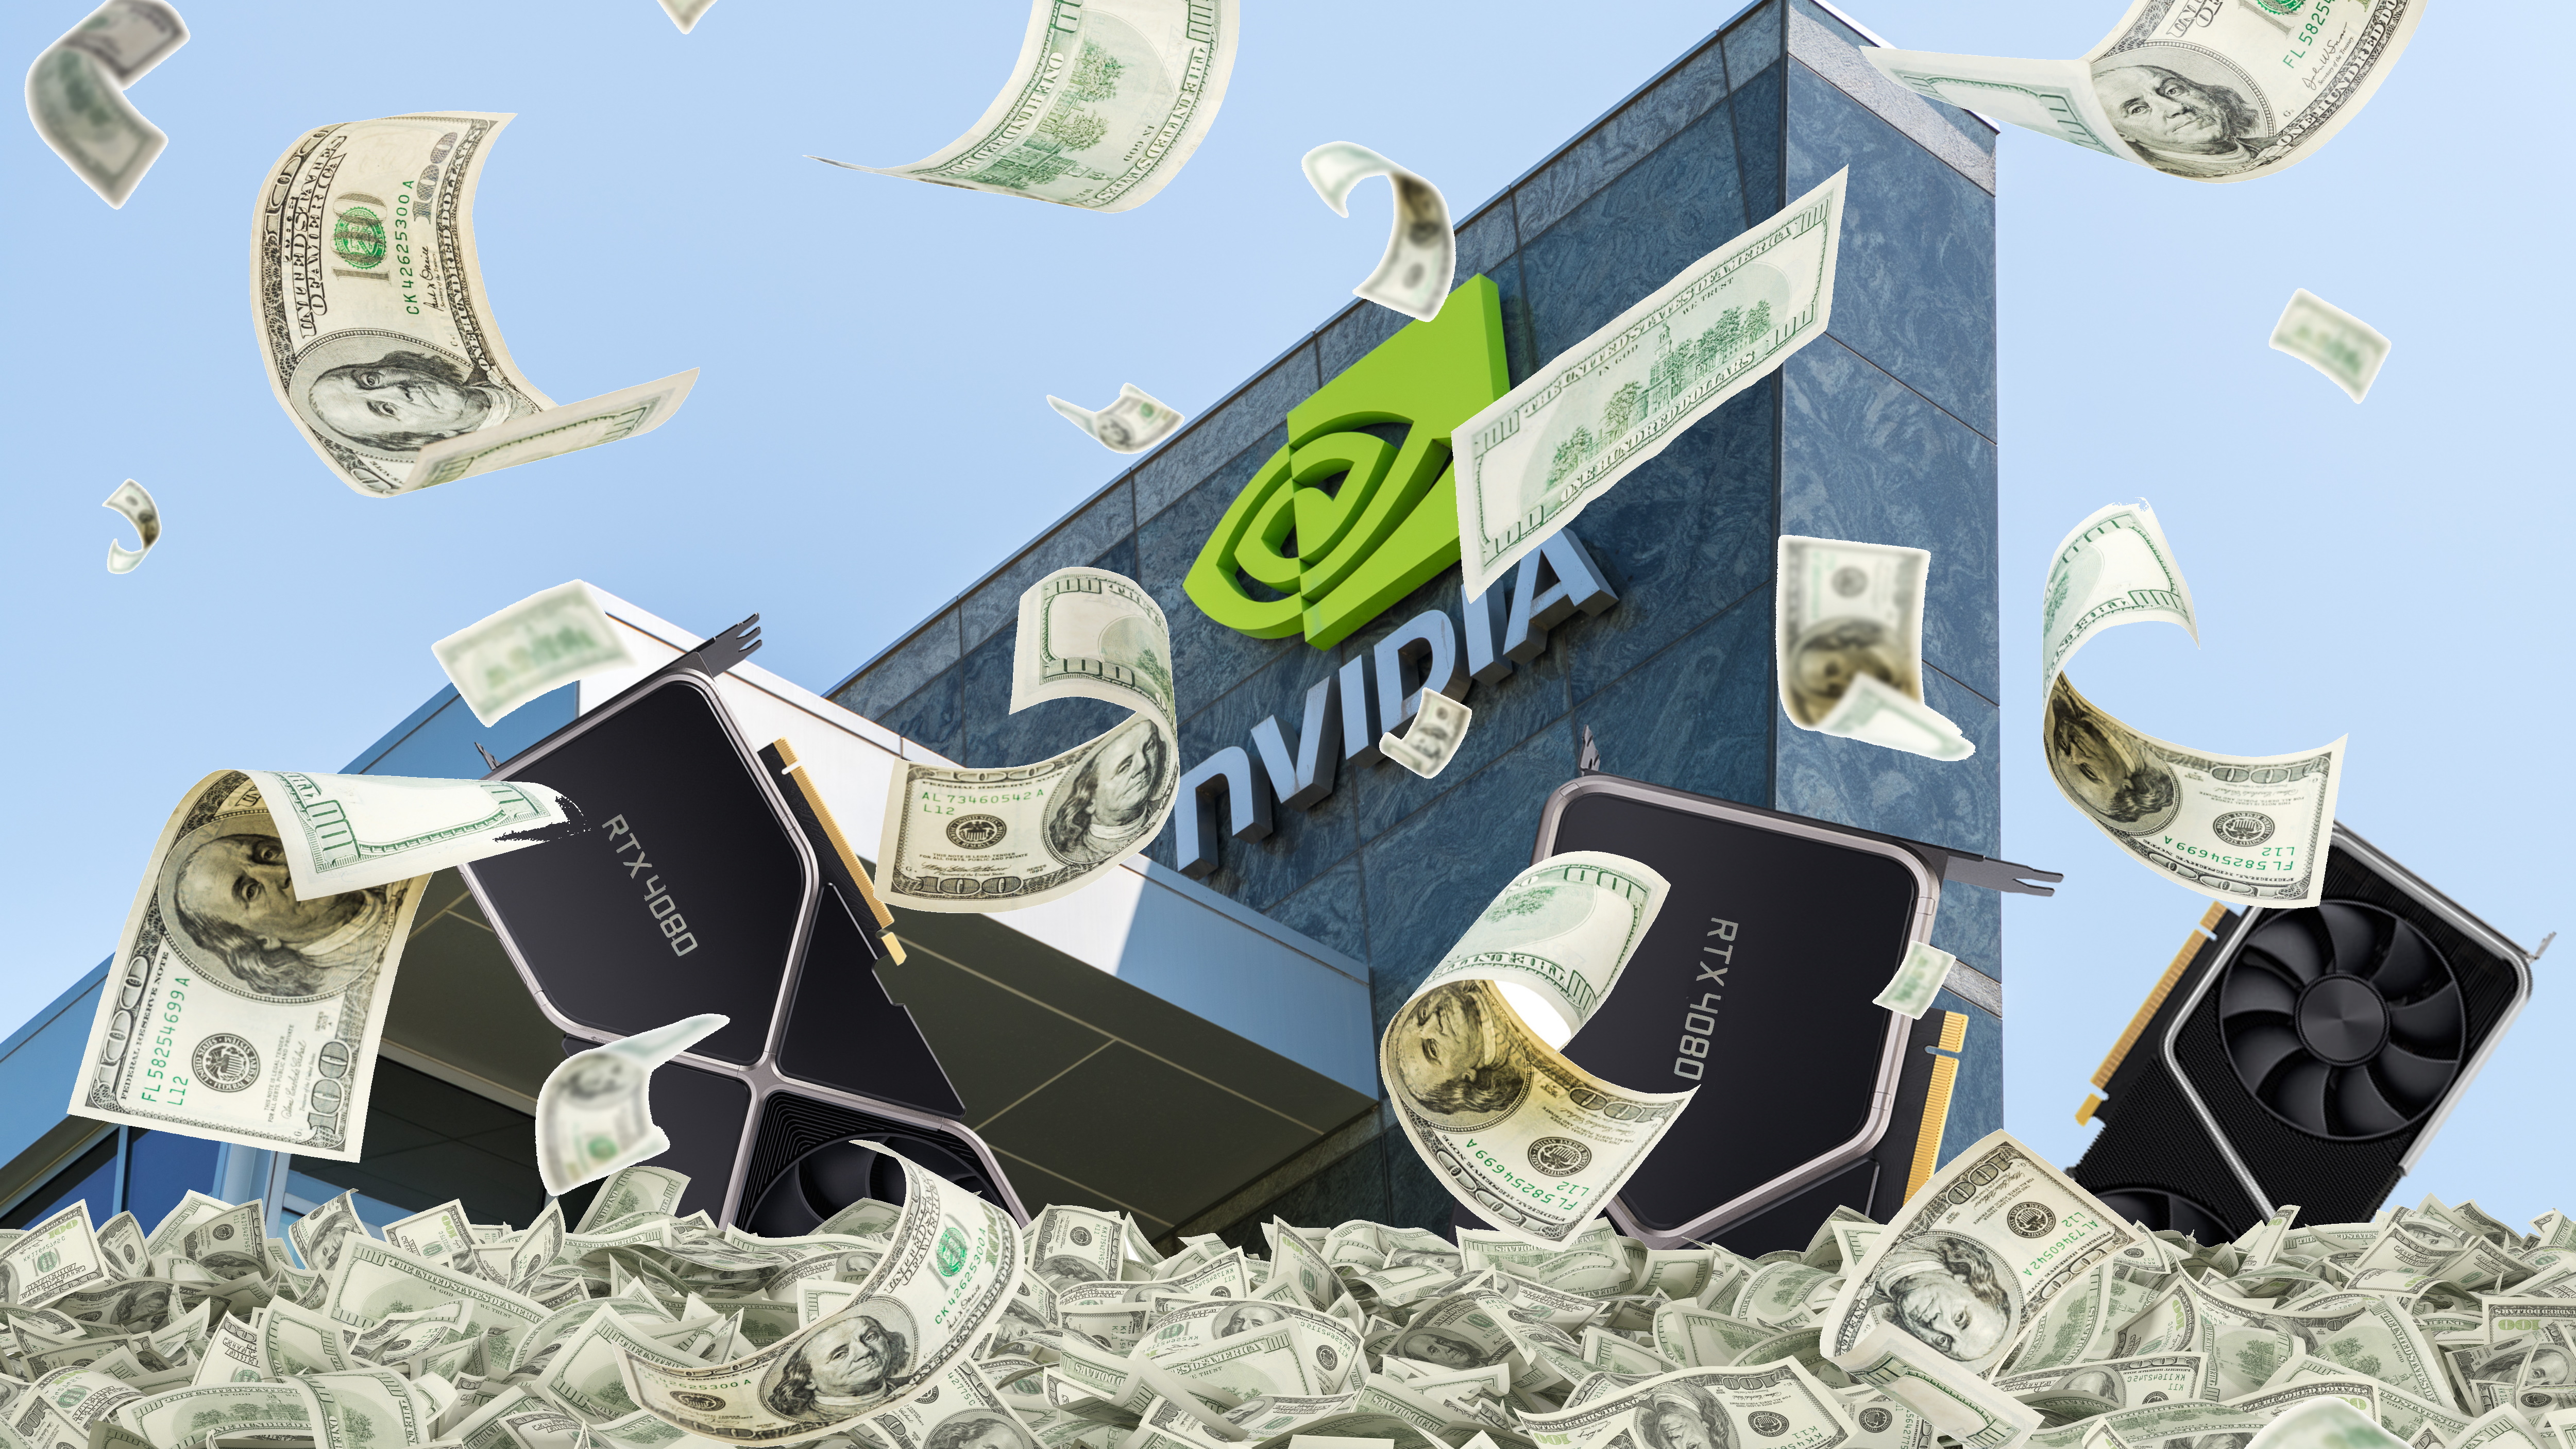 Nvidia might launch RTX 5080 GPU before RTX 5090, new rumor suggests – but we wouldn’t bank on it